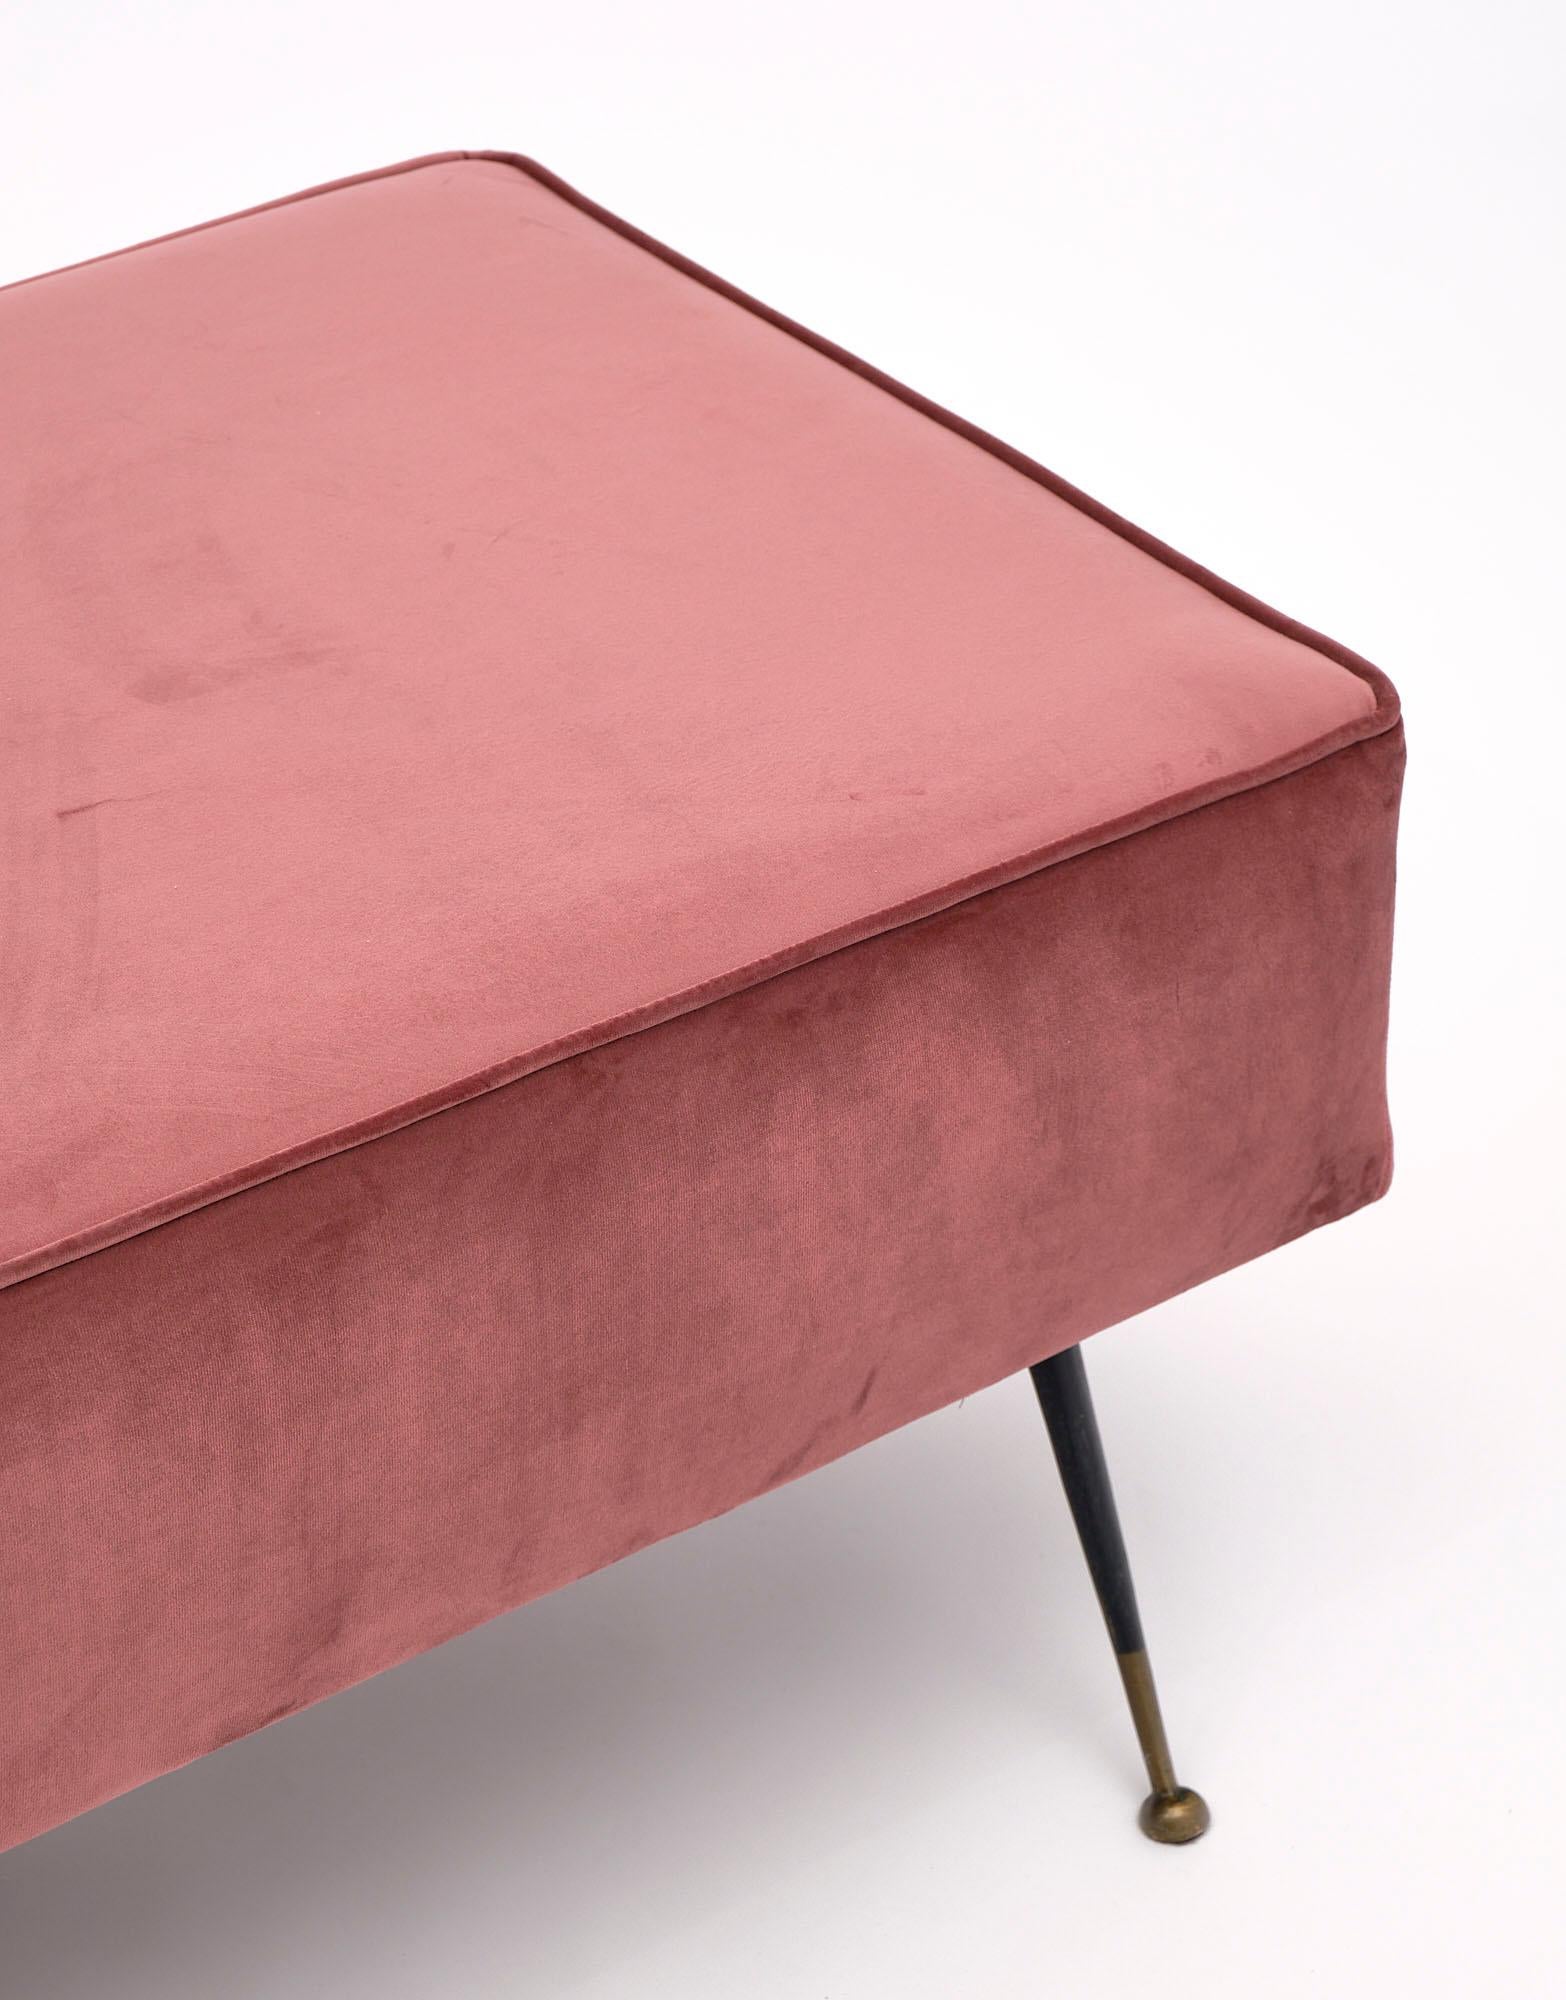 Bench, Italian, with newly upholstered seat in a pink velvet. This piece features six black lacquered legs with brass feet.